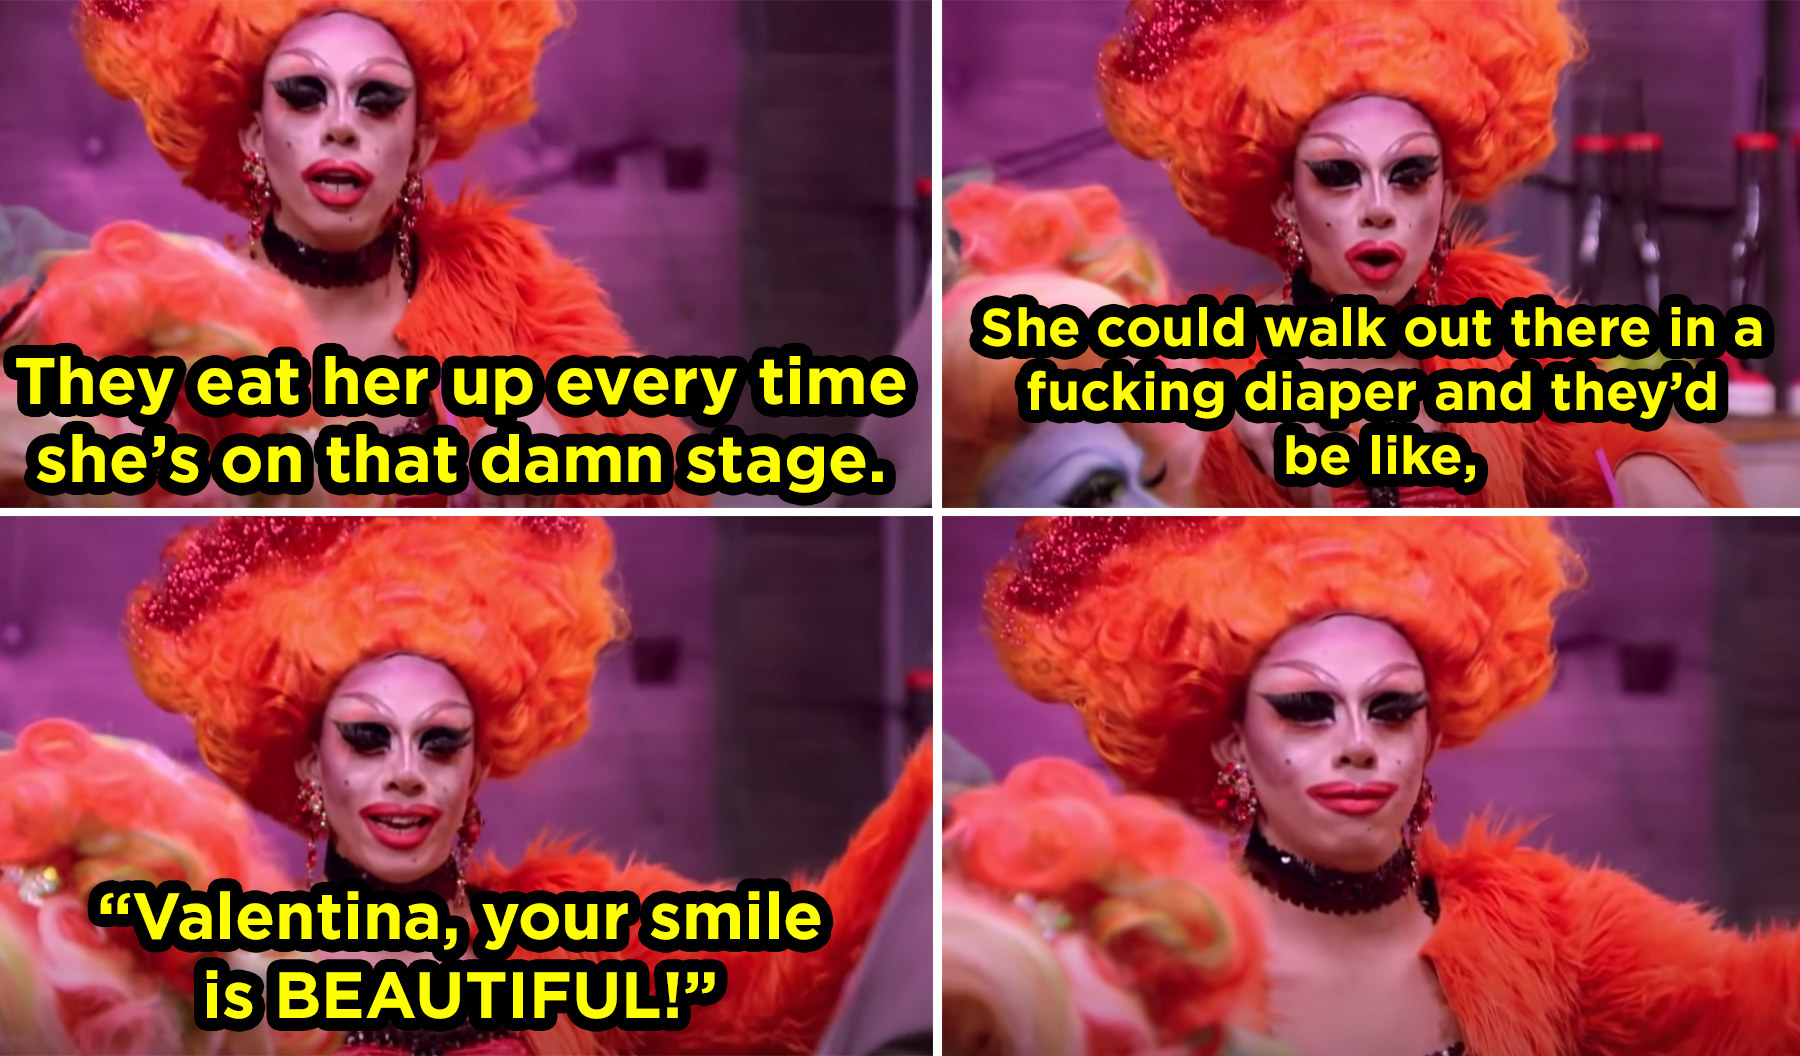 a man in a wig and full makeup as if in drag says &quot;they eat her up every time she&#x27;s on that stage. she could walk out there in a diaper and they&#x27;d be like VALENTINA your smile is beautiful!&quot;